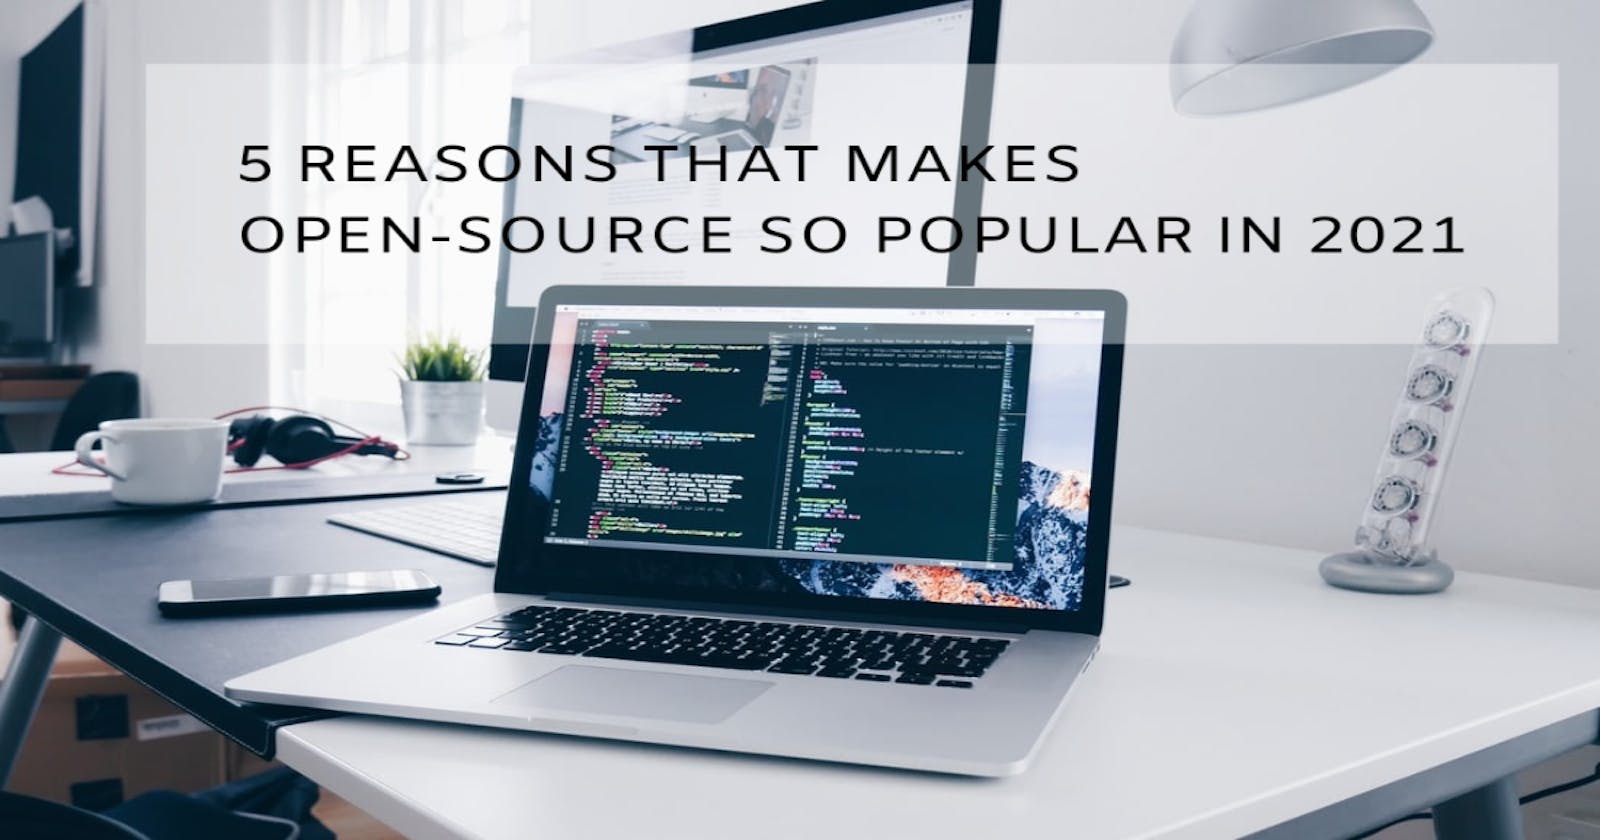 5 REASONS THAT MAKES OPEN-SOURCE SO POPULAR IN 2021